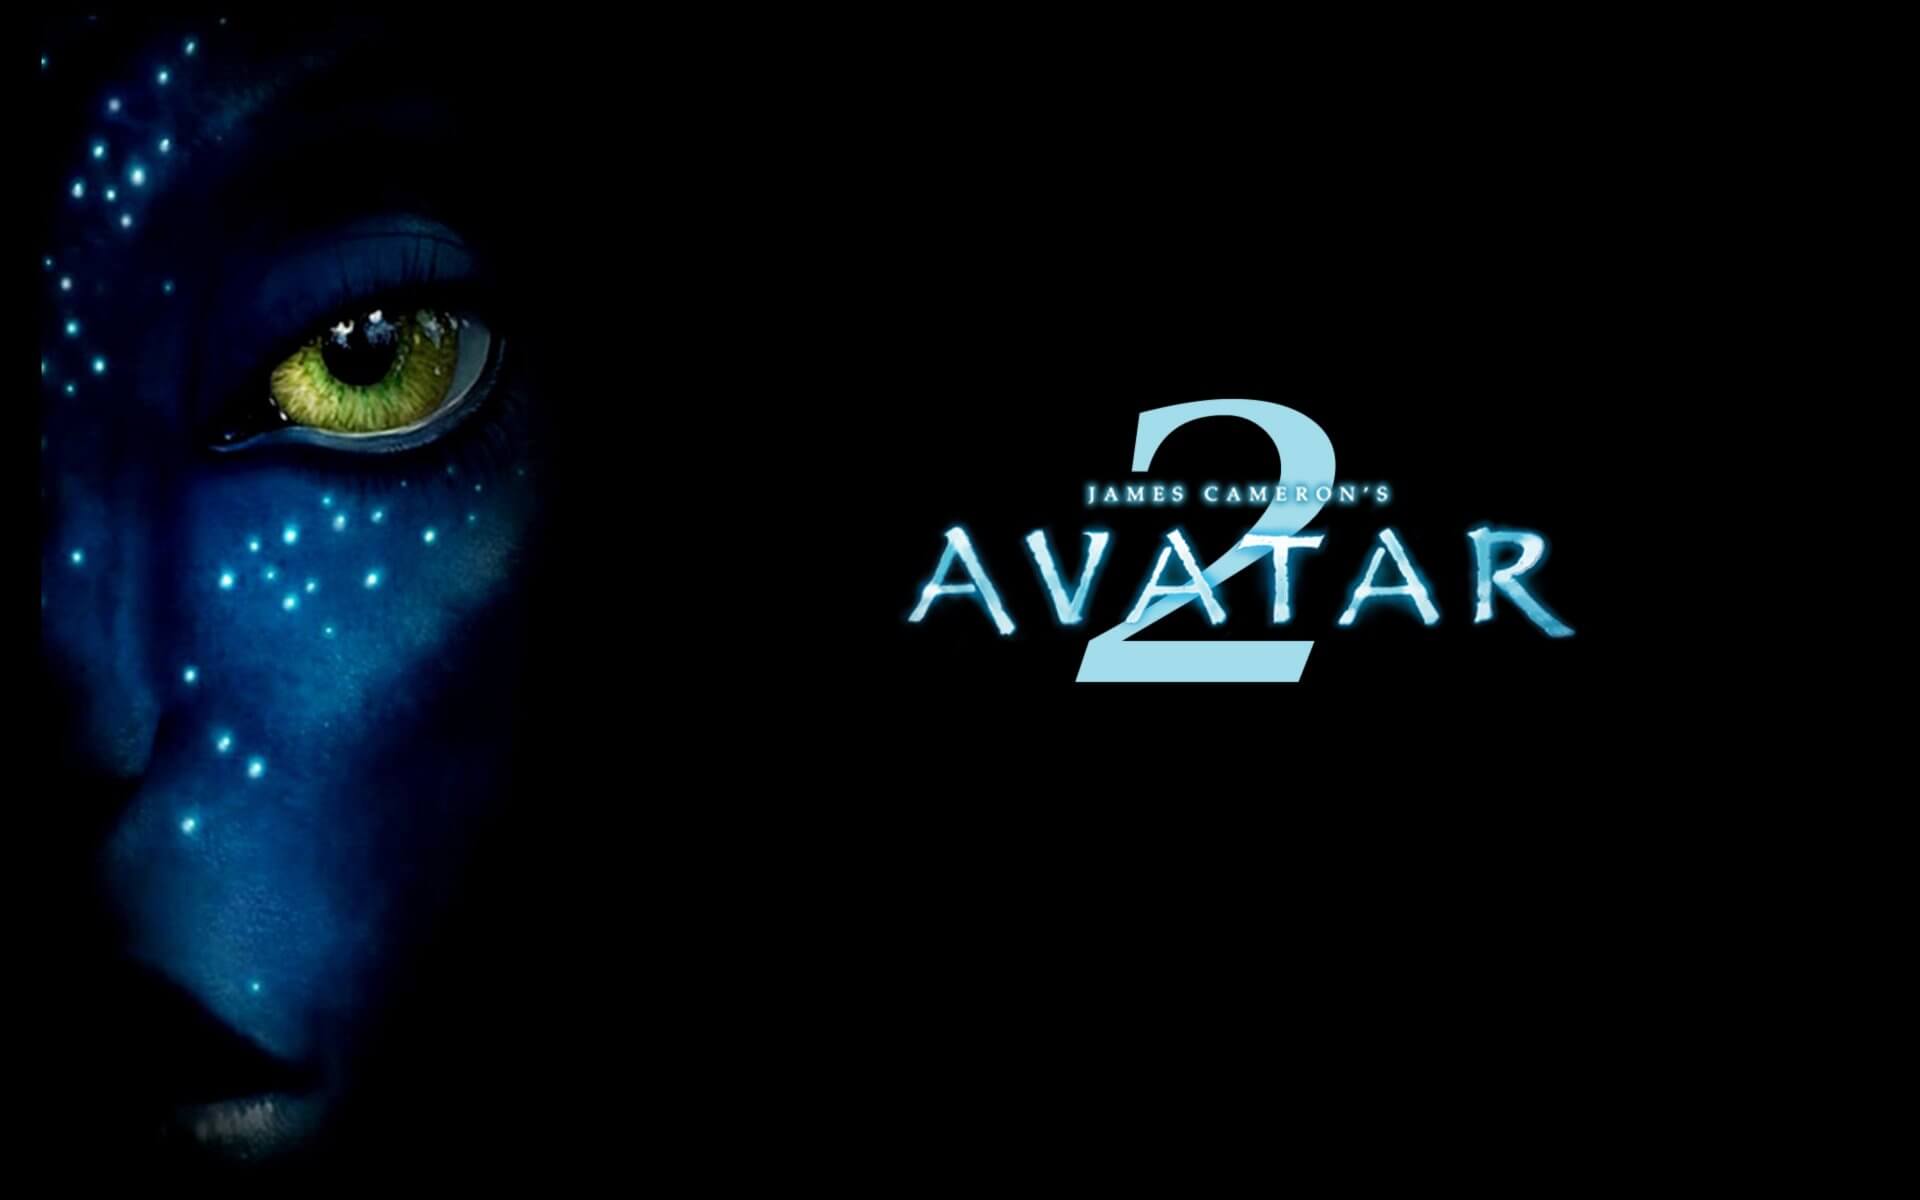 AVATAR 2: THE WAY OF WATER 4K 2022 for Download